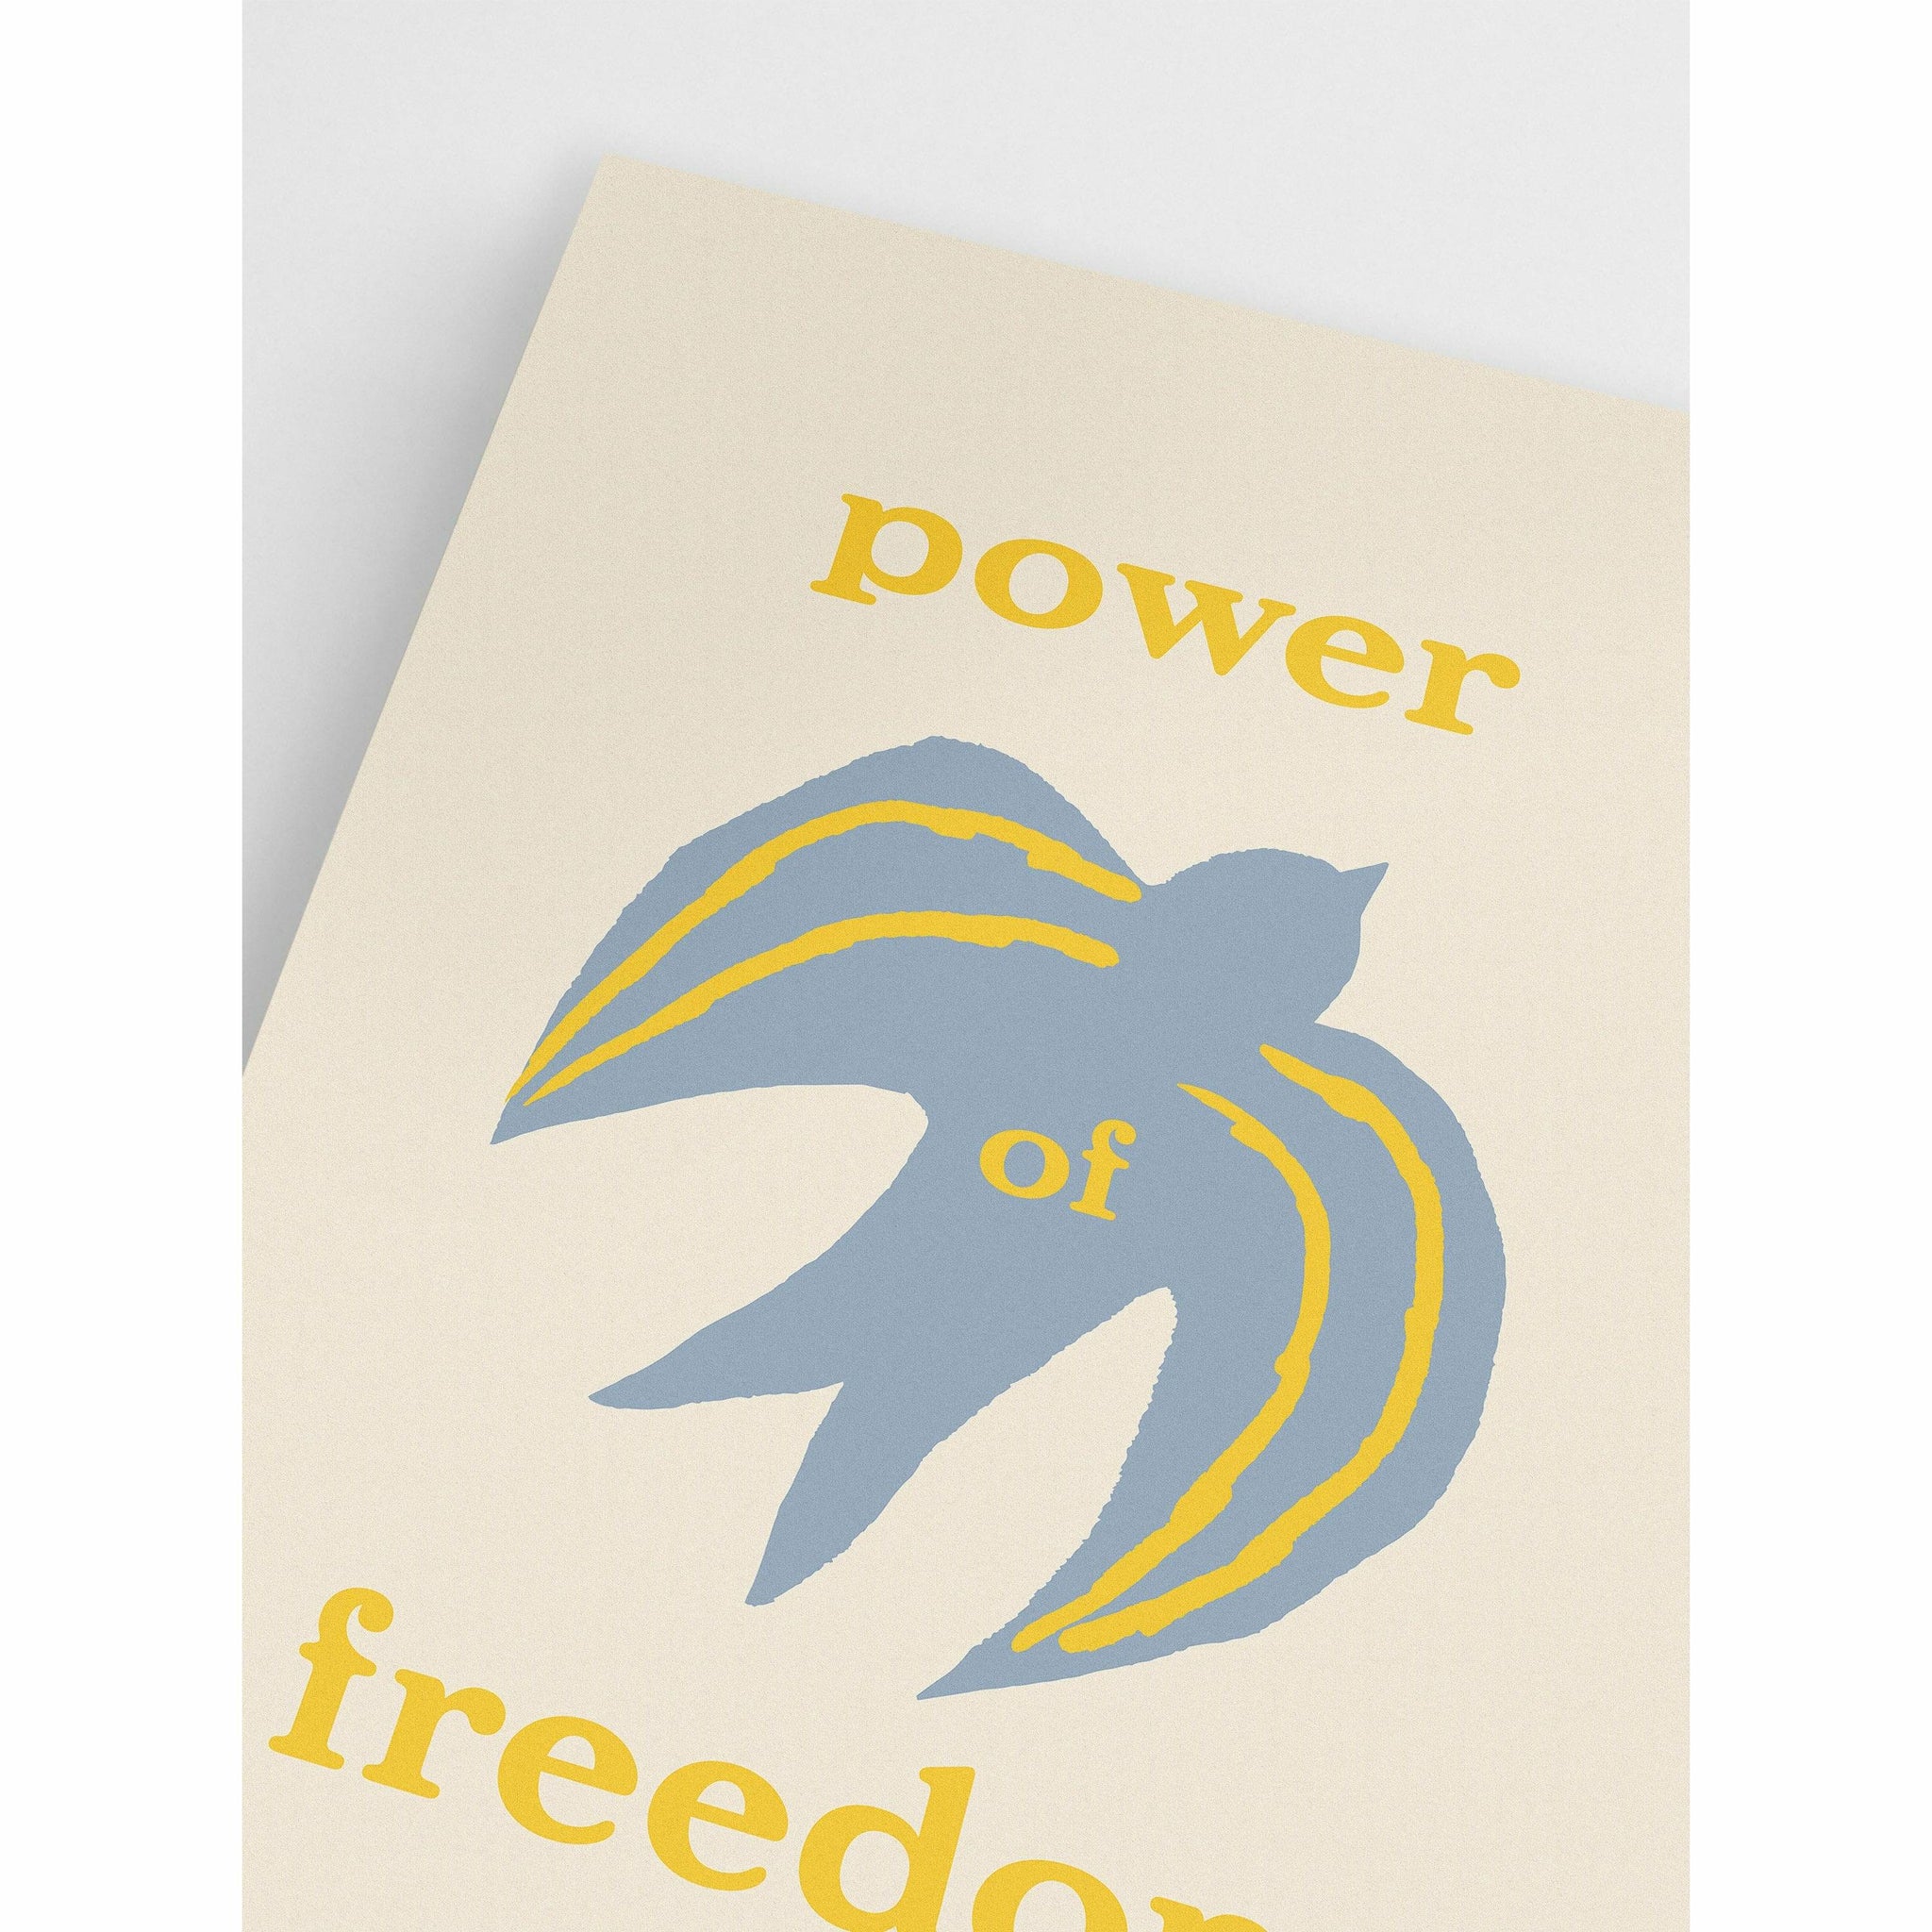 Power of freedom Poster